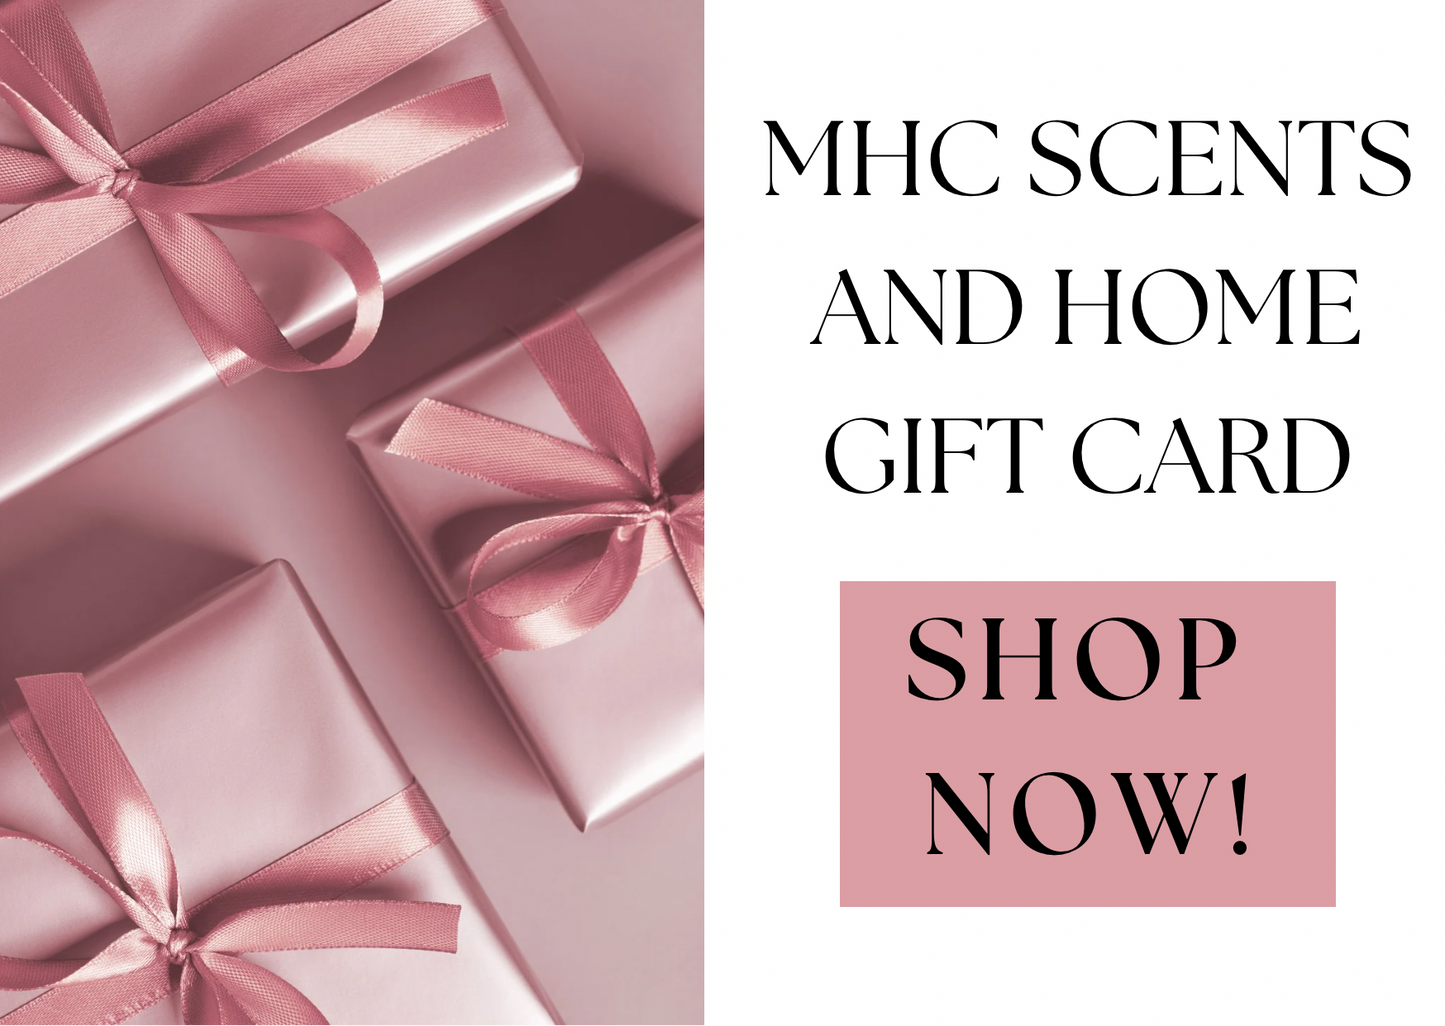 MHC Scents and Home Gift Card